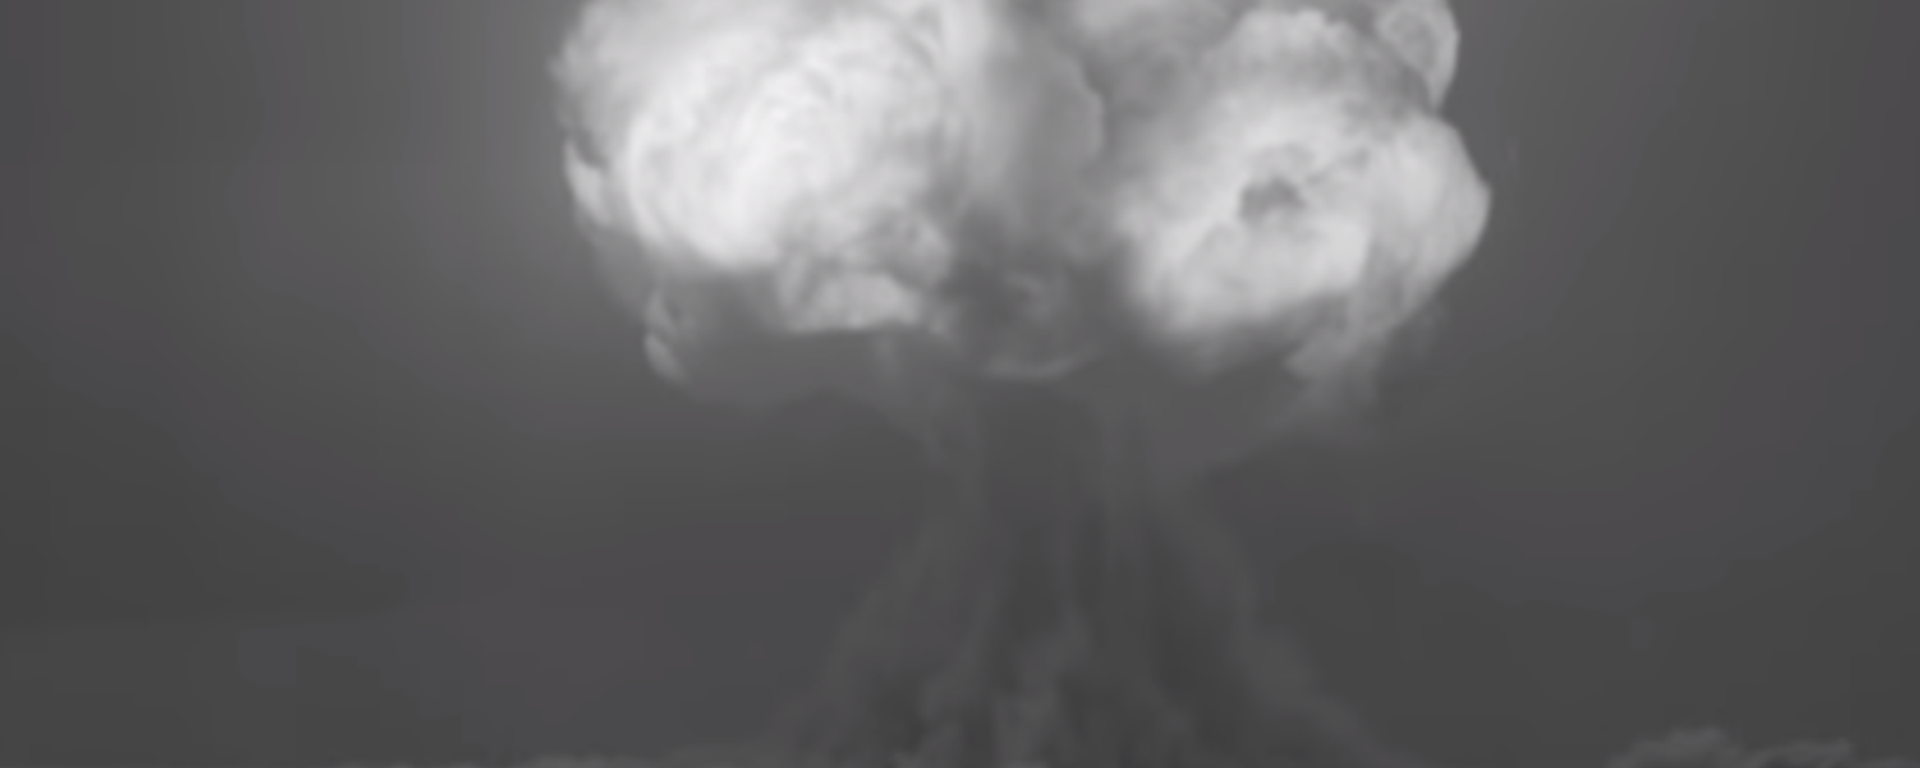 A screenshot from restored footage of the Trinity test, the world's first nuclear weapons explosion, on July 16, 1945 - Sputnik International, 1920, 20.05.2021